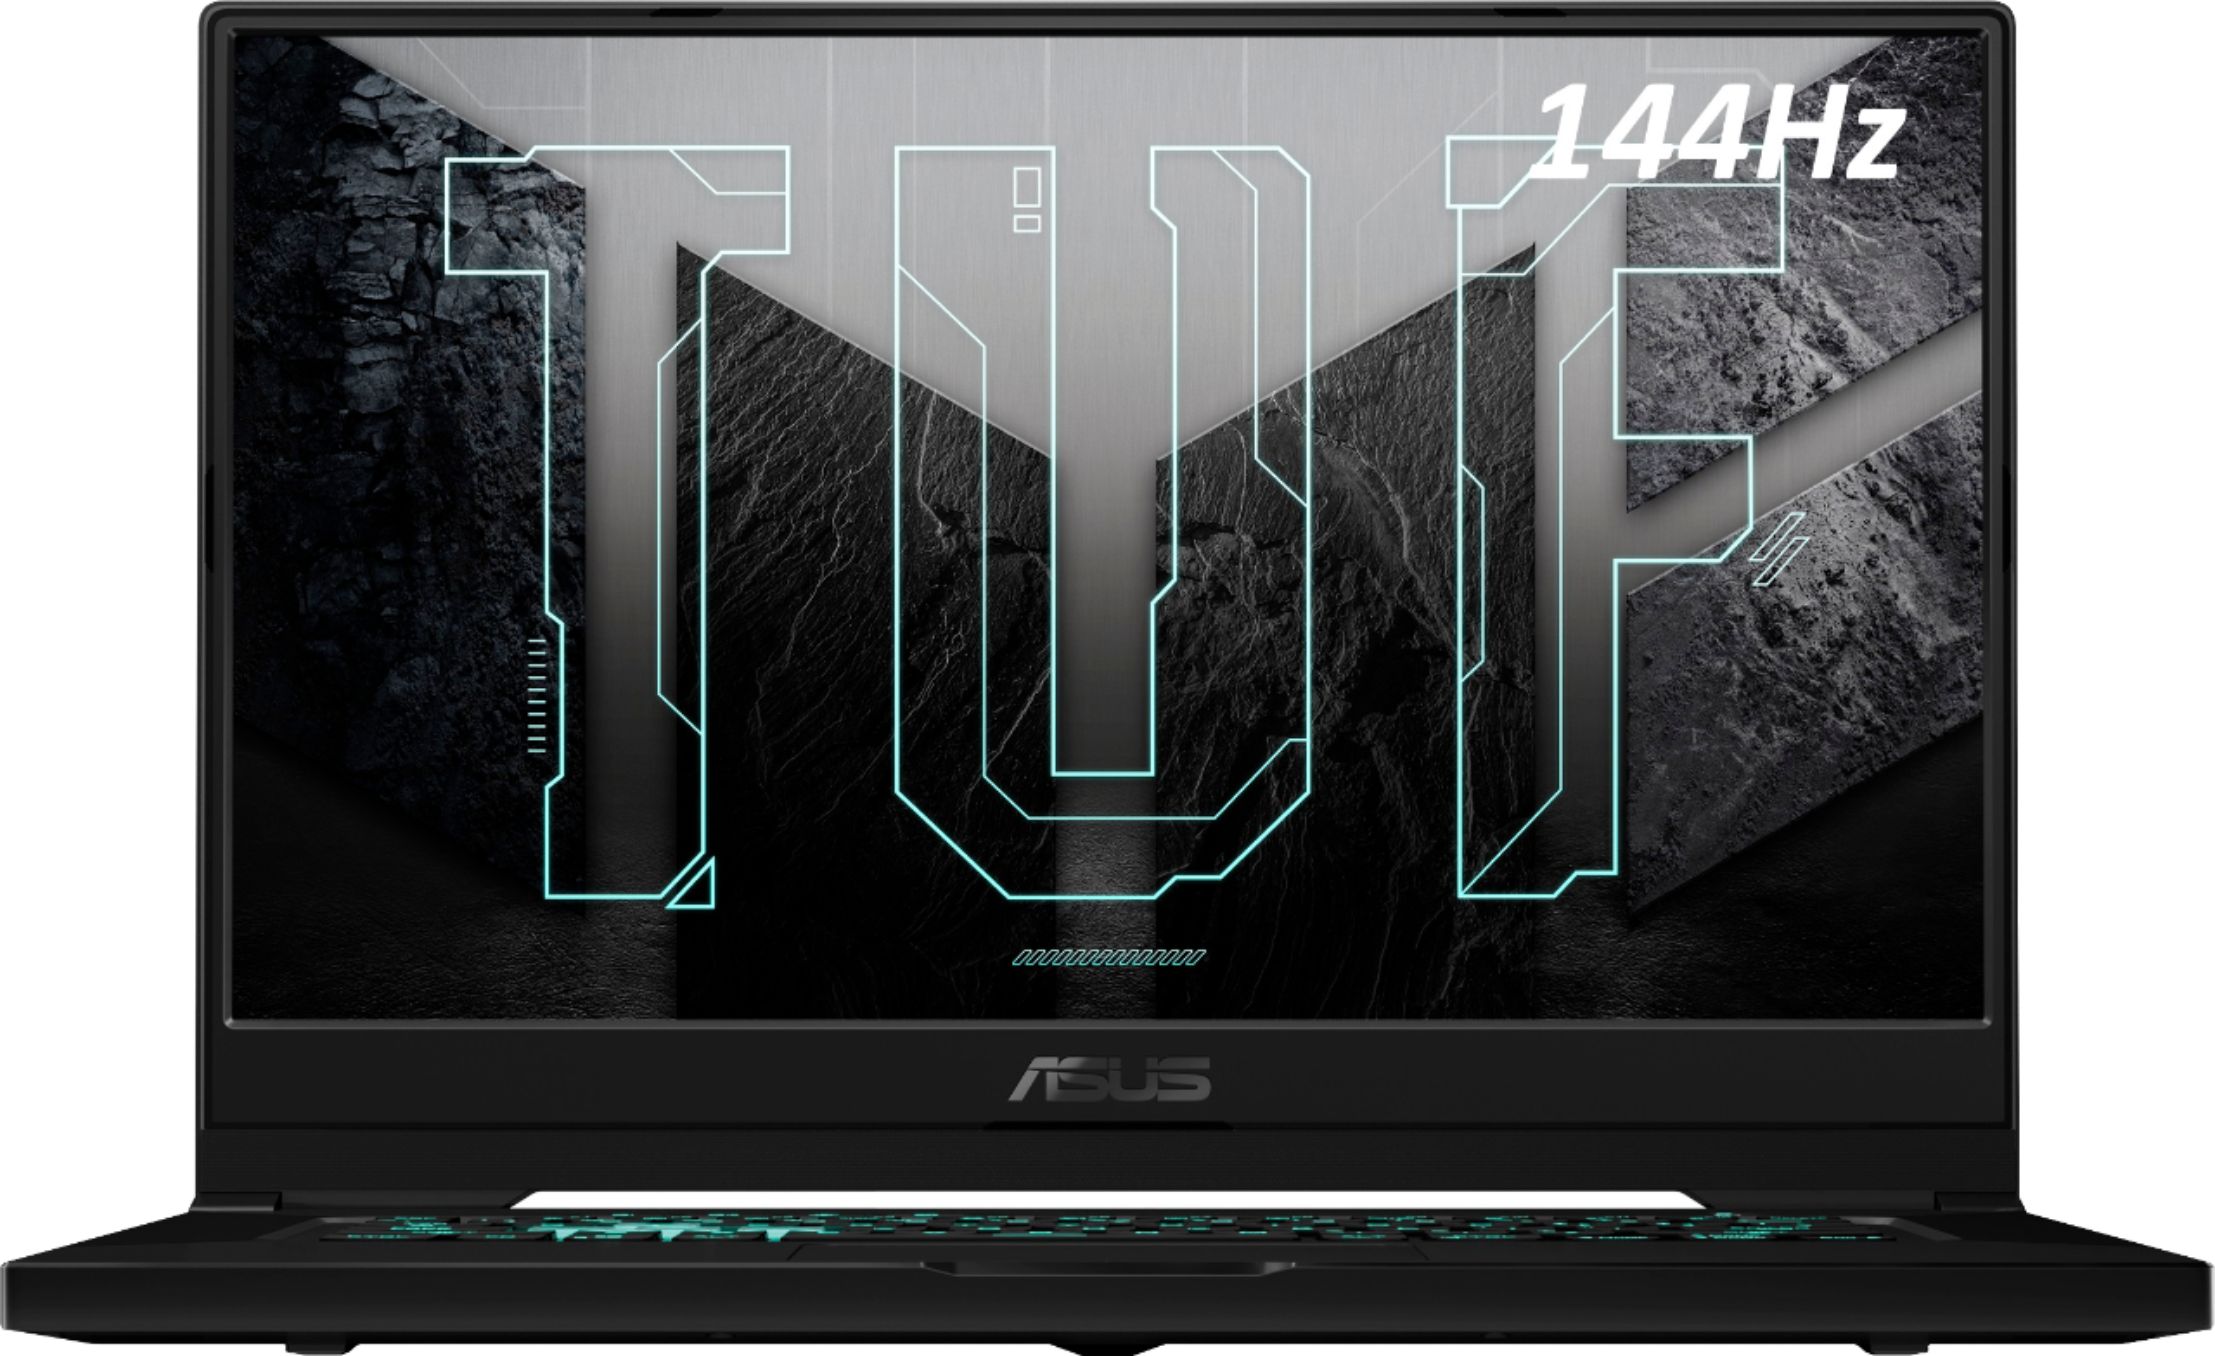 This Asus TUF Dash F15 laptop with GeForce RTX 3060 graphics, 11th generation Core i7 CPU and 16 GB RAM is lower up to $ 1100 USD